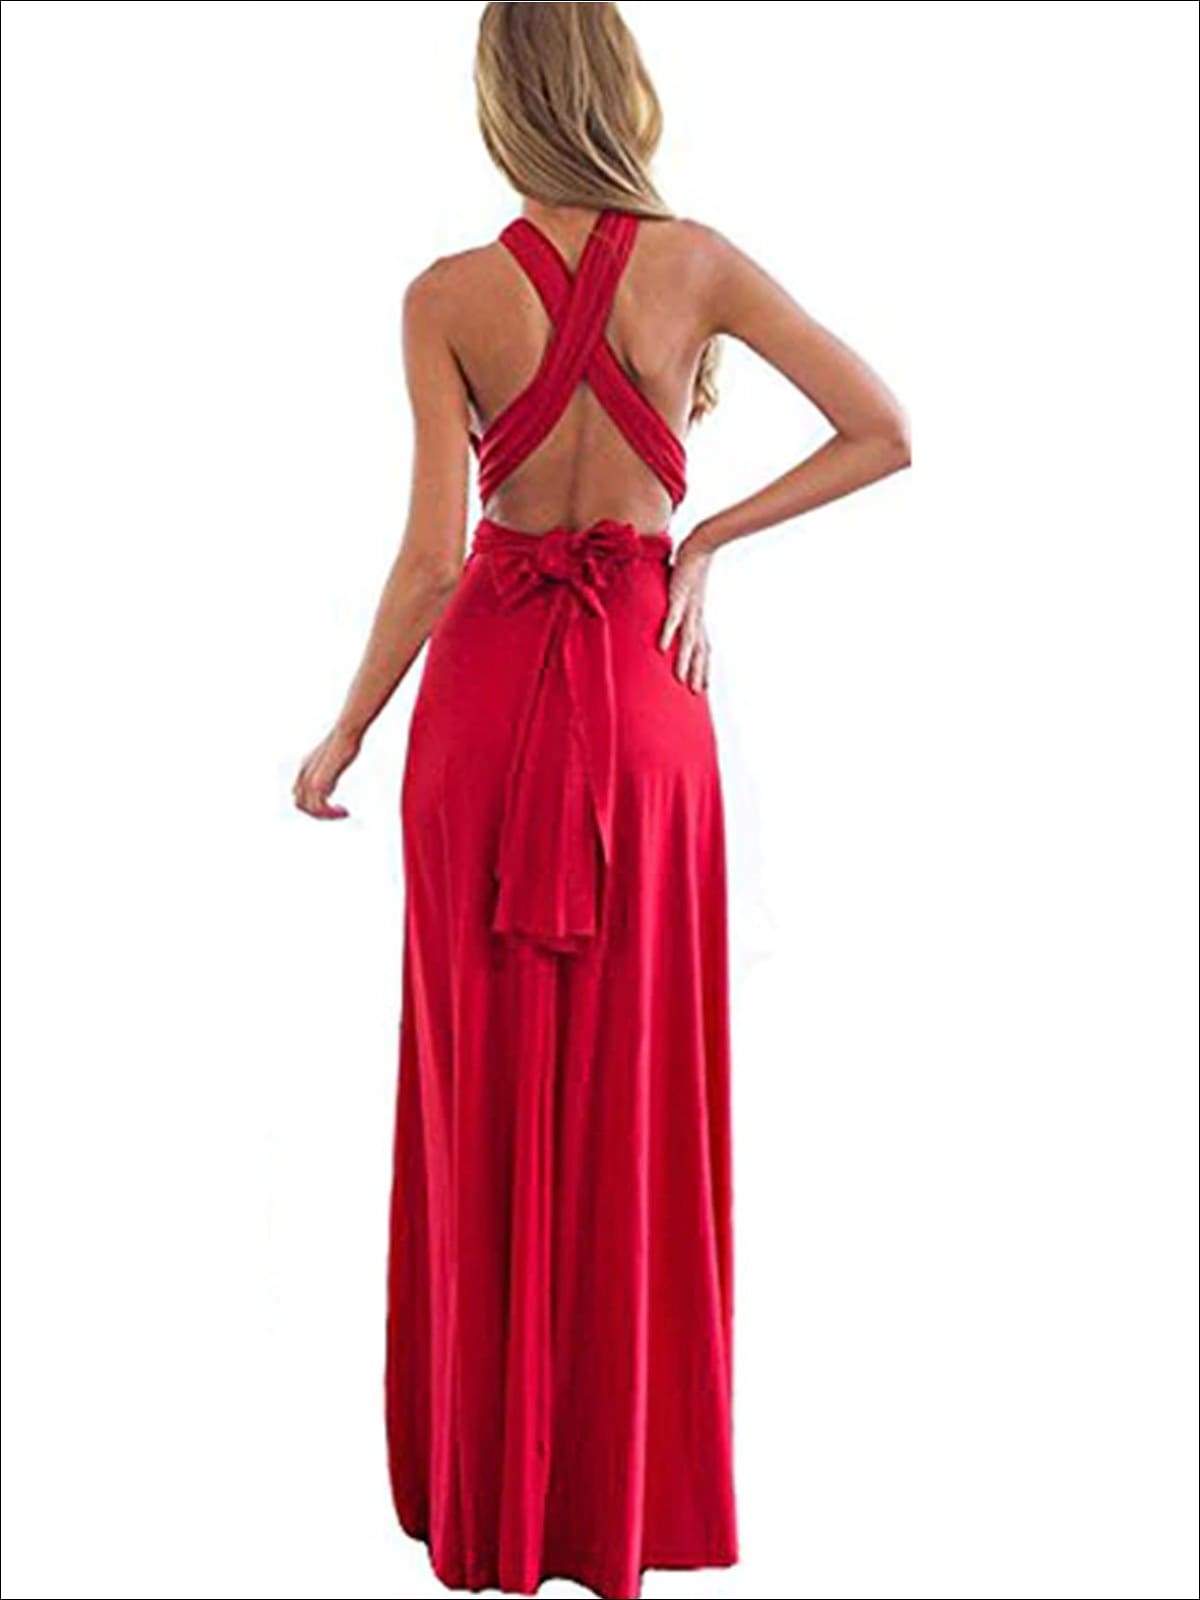 Convertible Multi Way Wrap Dress, Red dresses classy, Classy dress  outfits, Fashion dresss